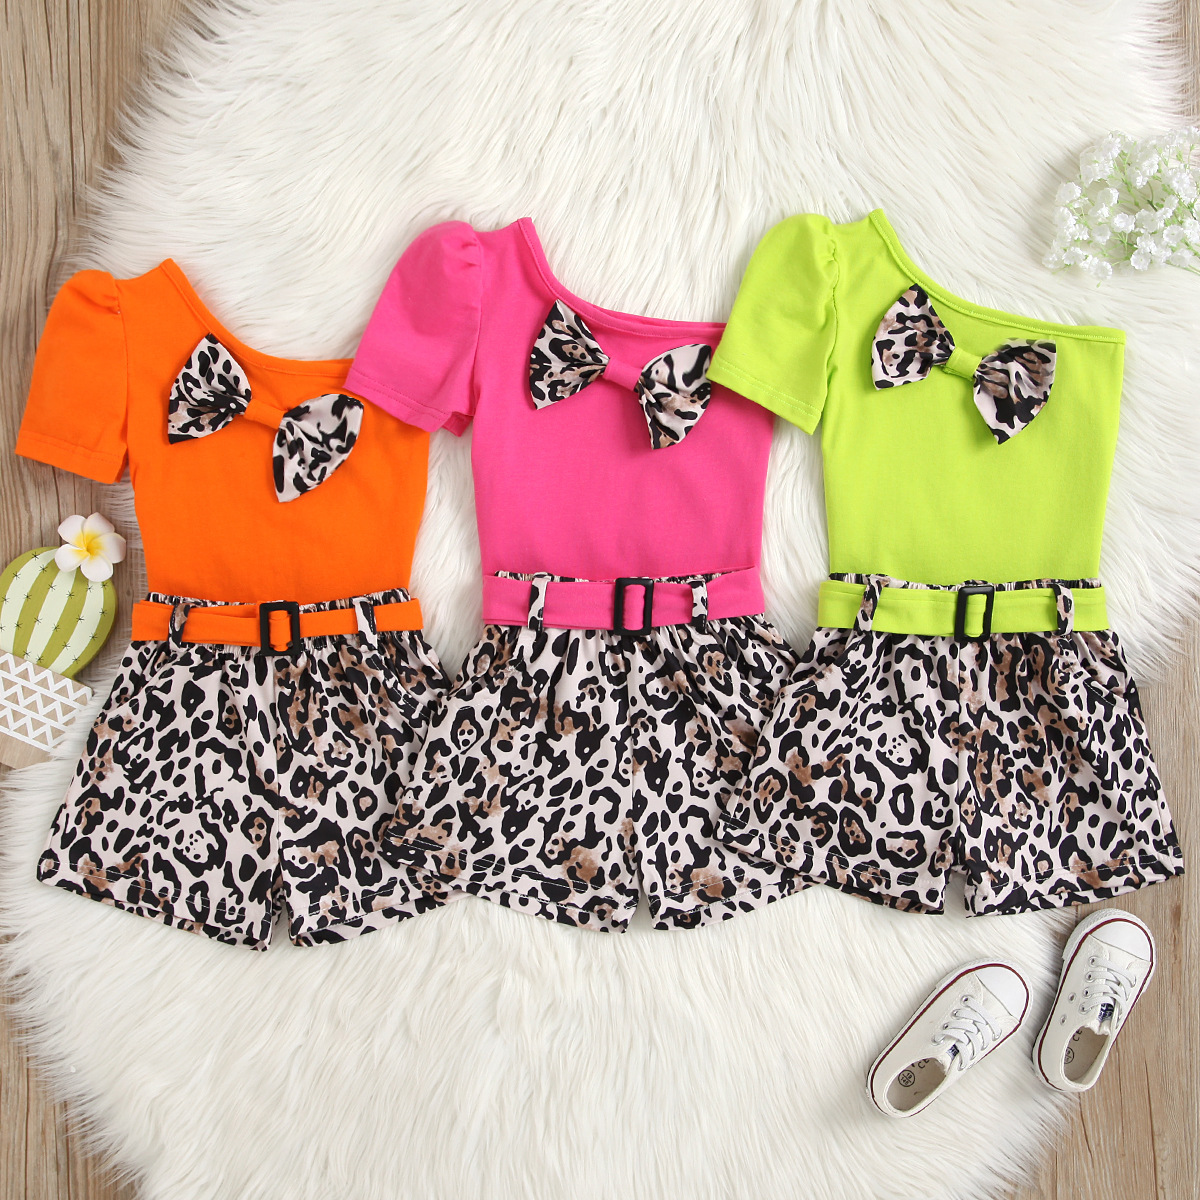 

Girls Designer Clothes Kids Summer Boutique Clothing Sets Baby Half Shoulder Bubble Sleeve Bowknot Tops Leopard Belt Shorts Suits Casual T-Shirts Pants Outfits B23, Mixed colors;random delivery